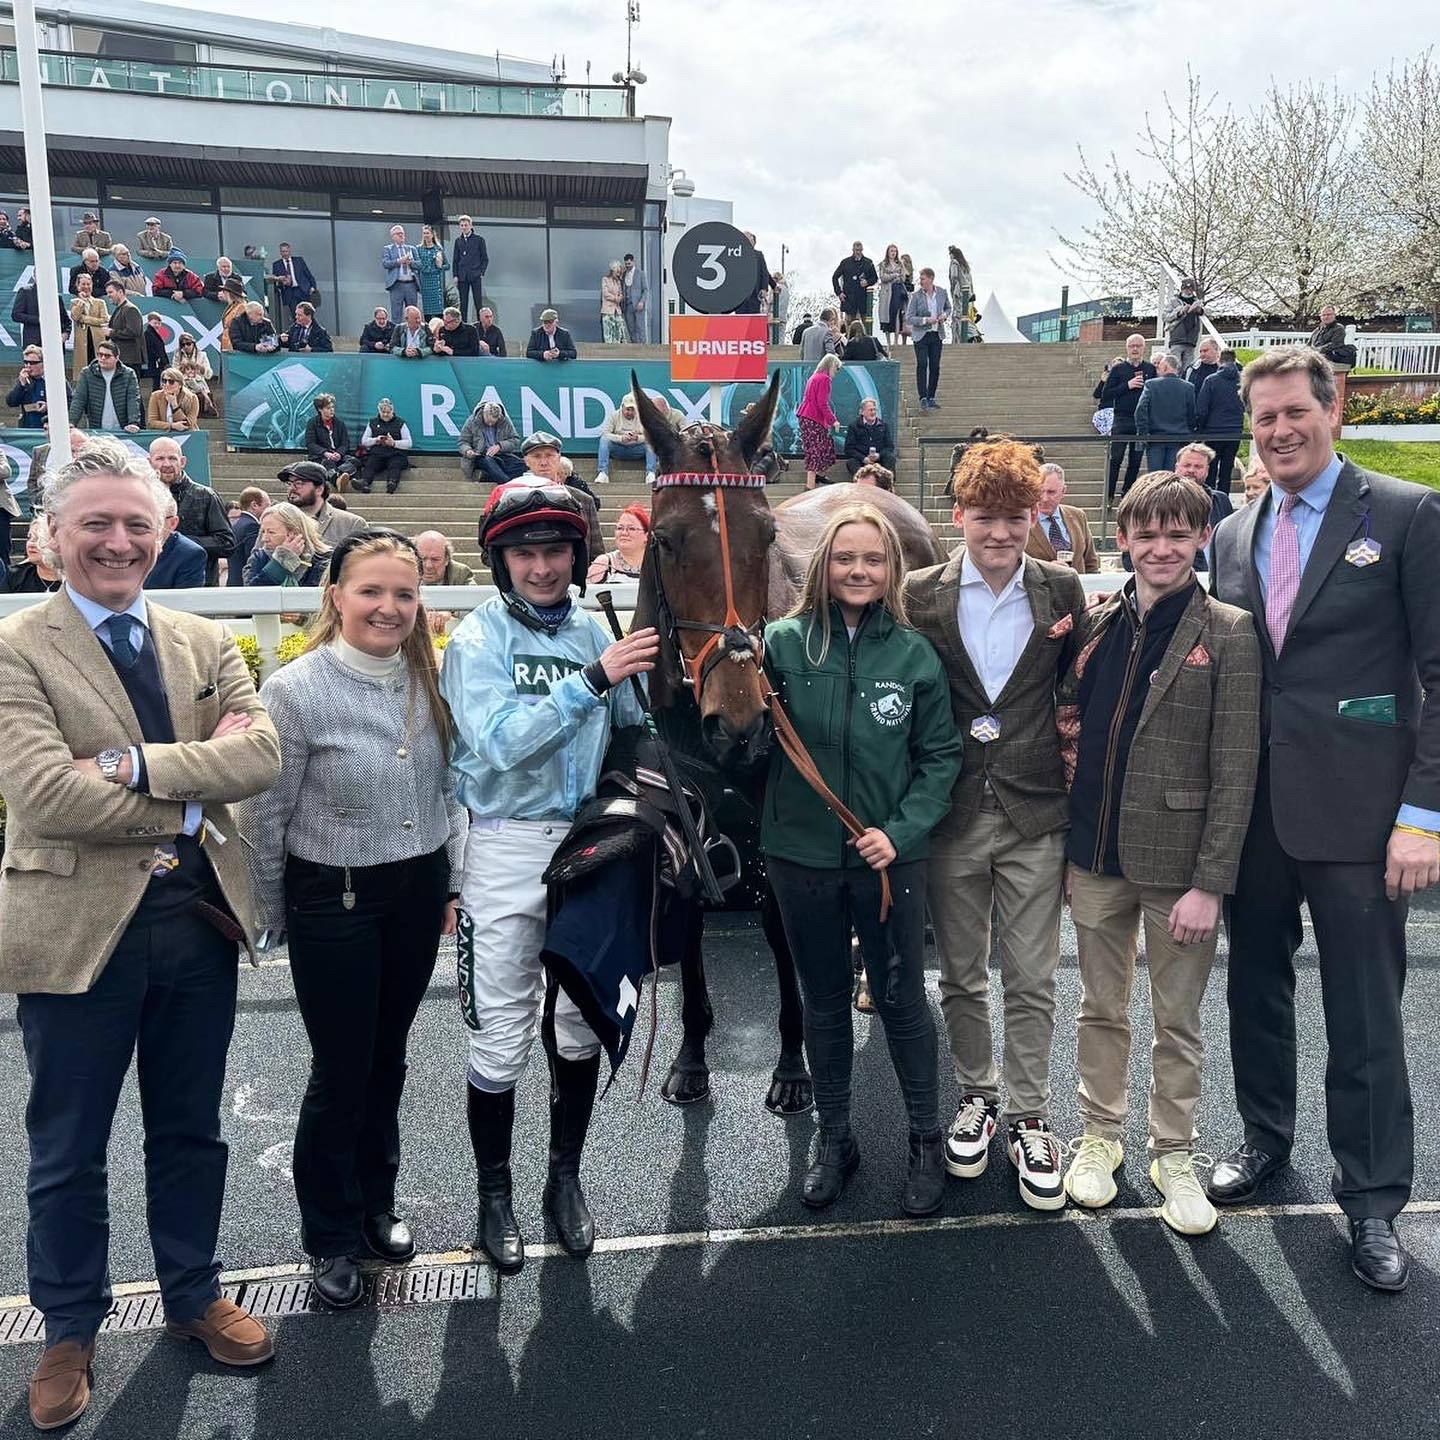 3rd For Bugise Seagull in Aintree Grade 1